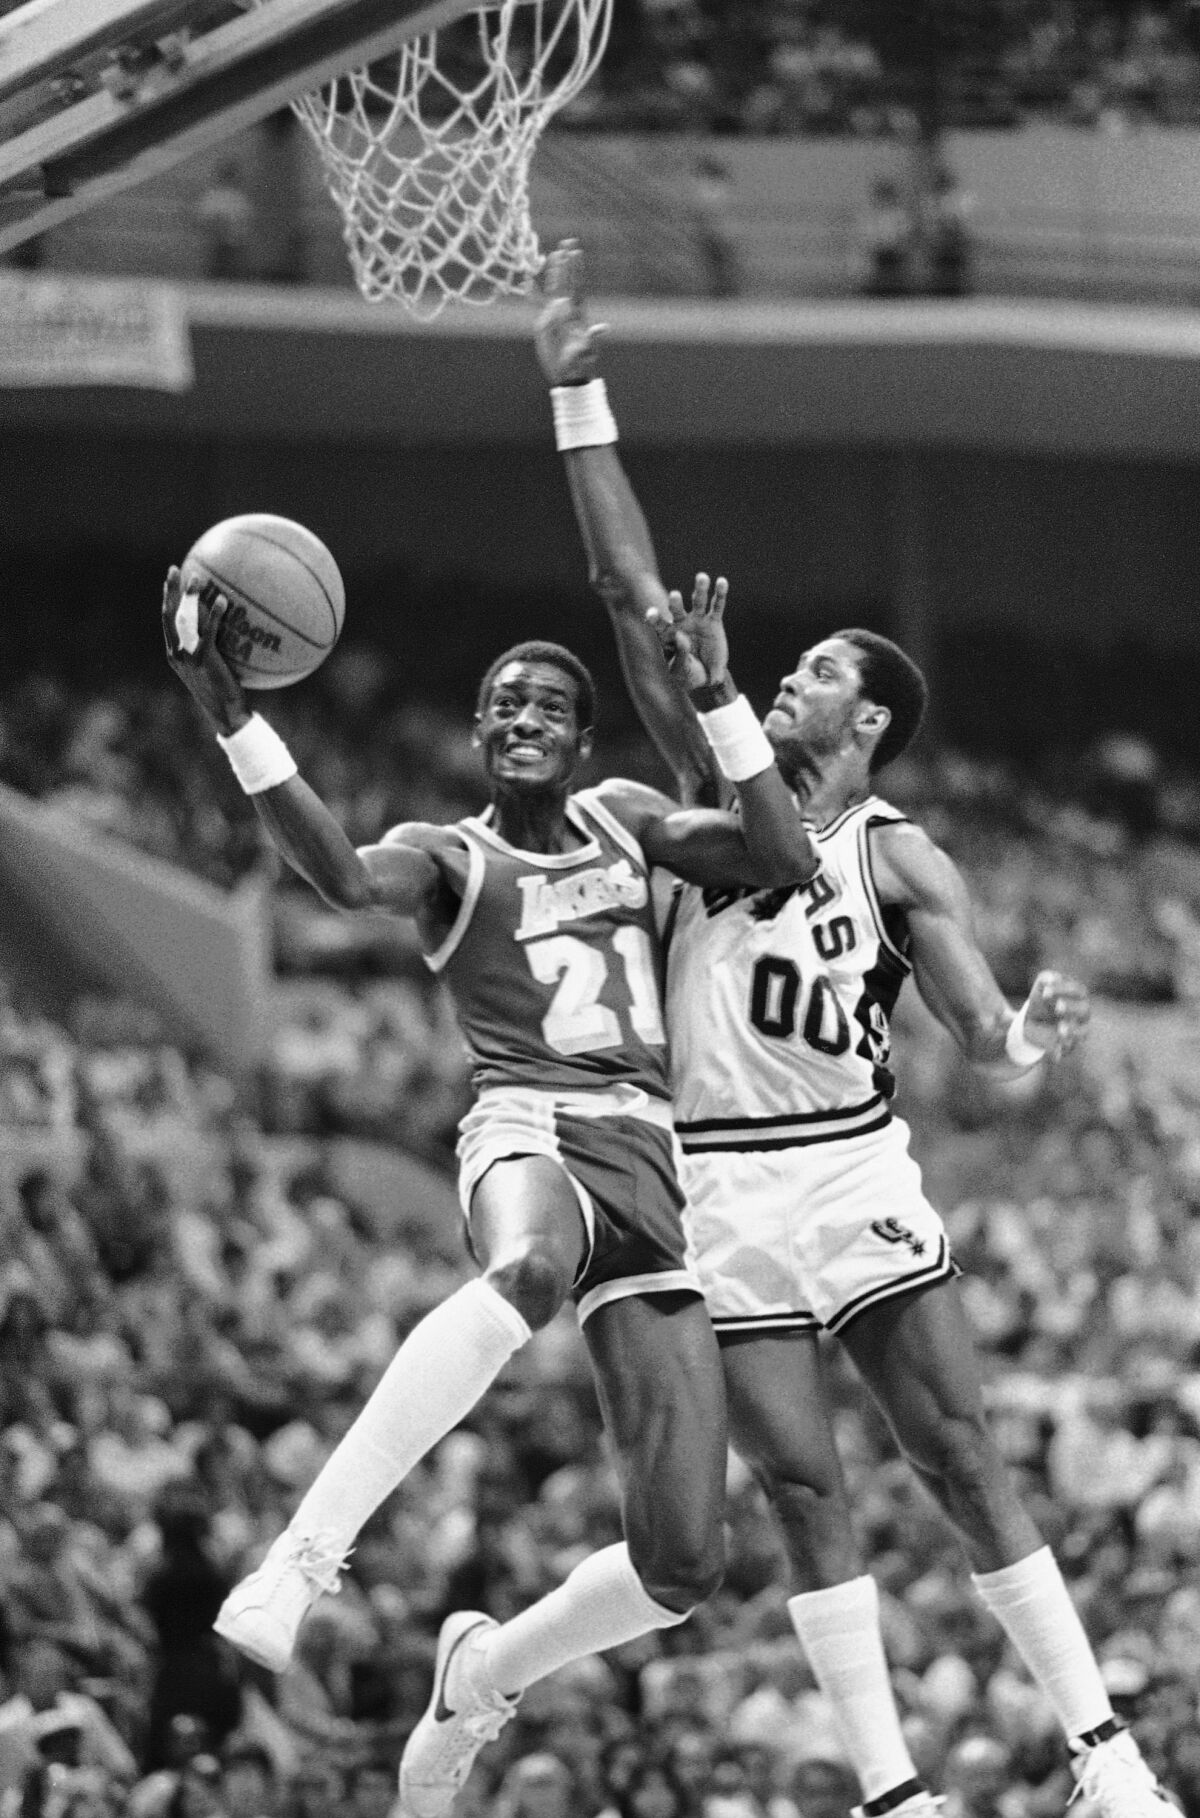 Lakers forward Michael Cooper attempts a layup against Spurs guard Johnny Moore during Game 4 of their playoff series in 1983